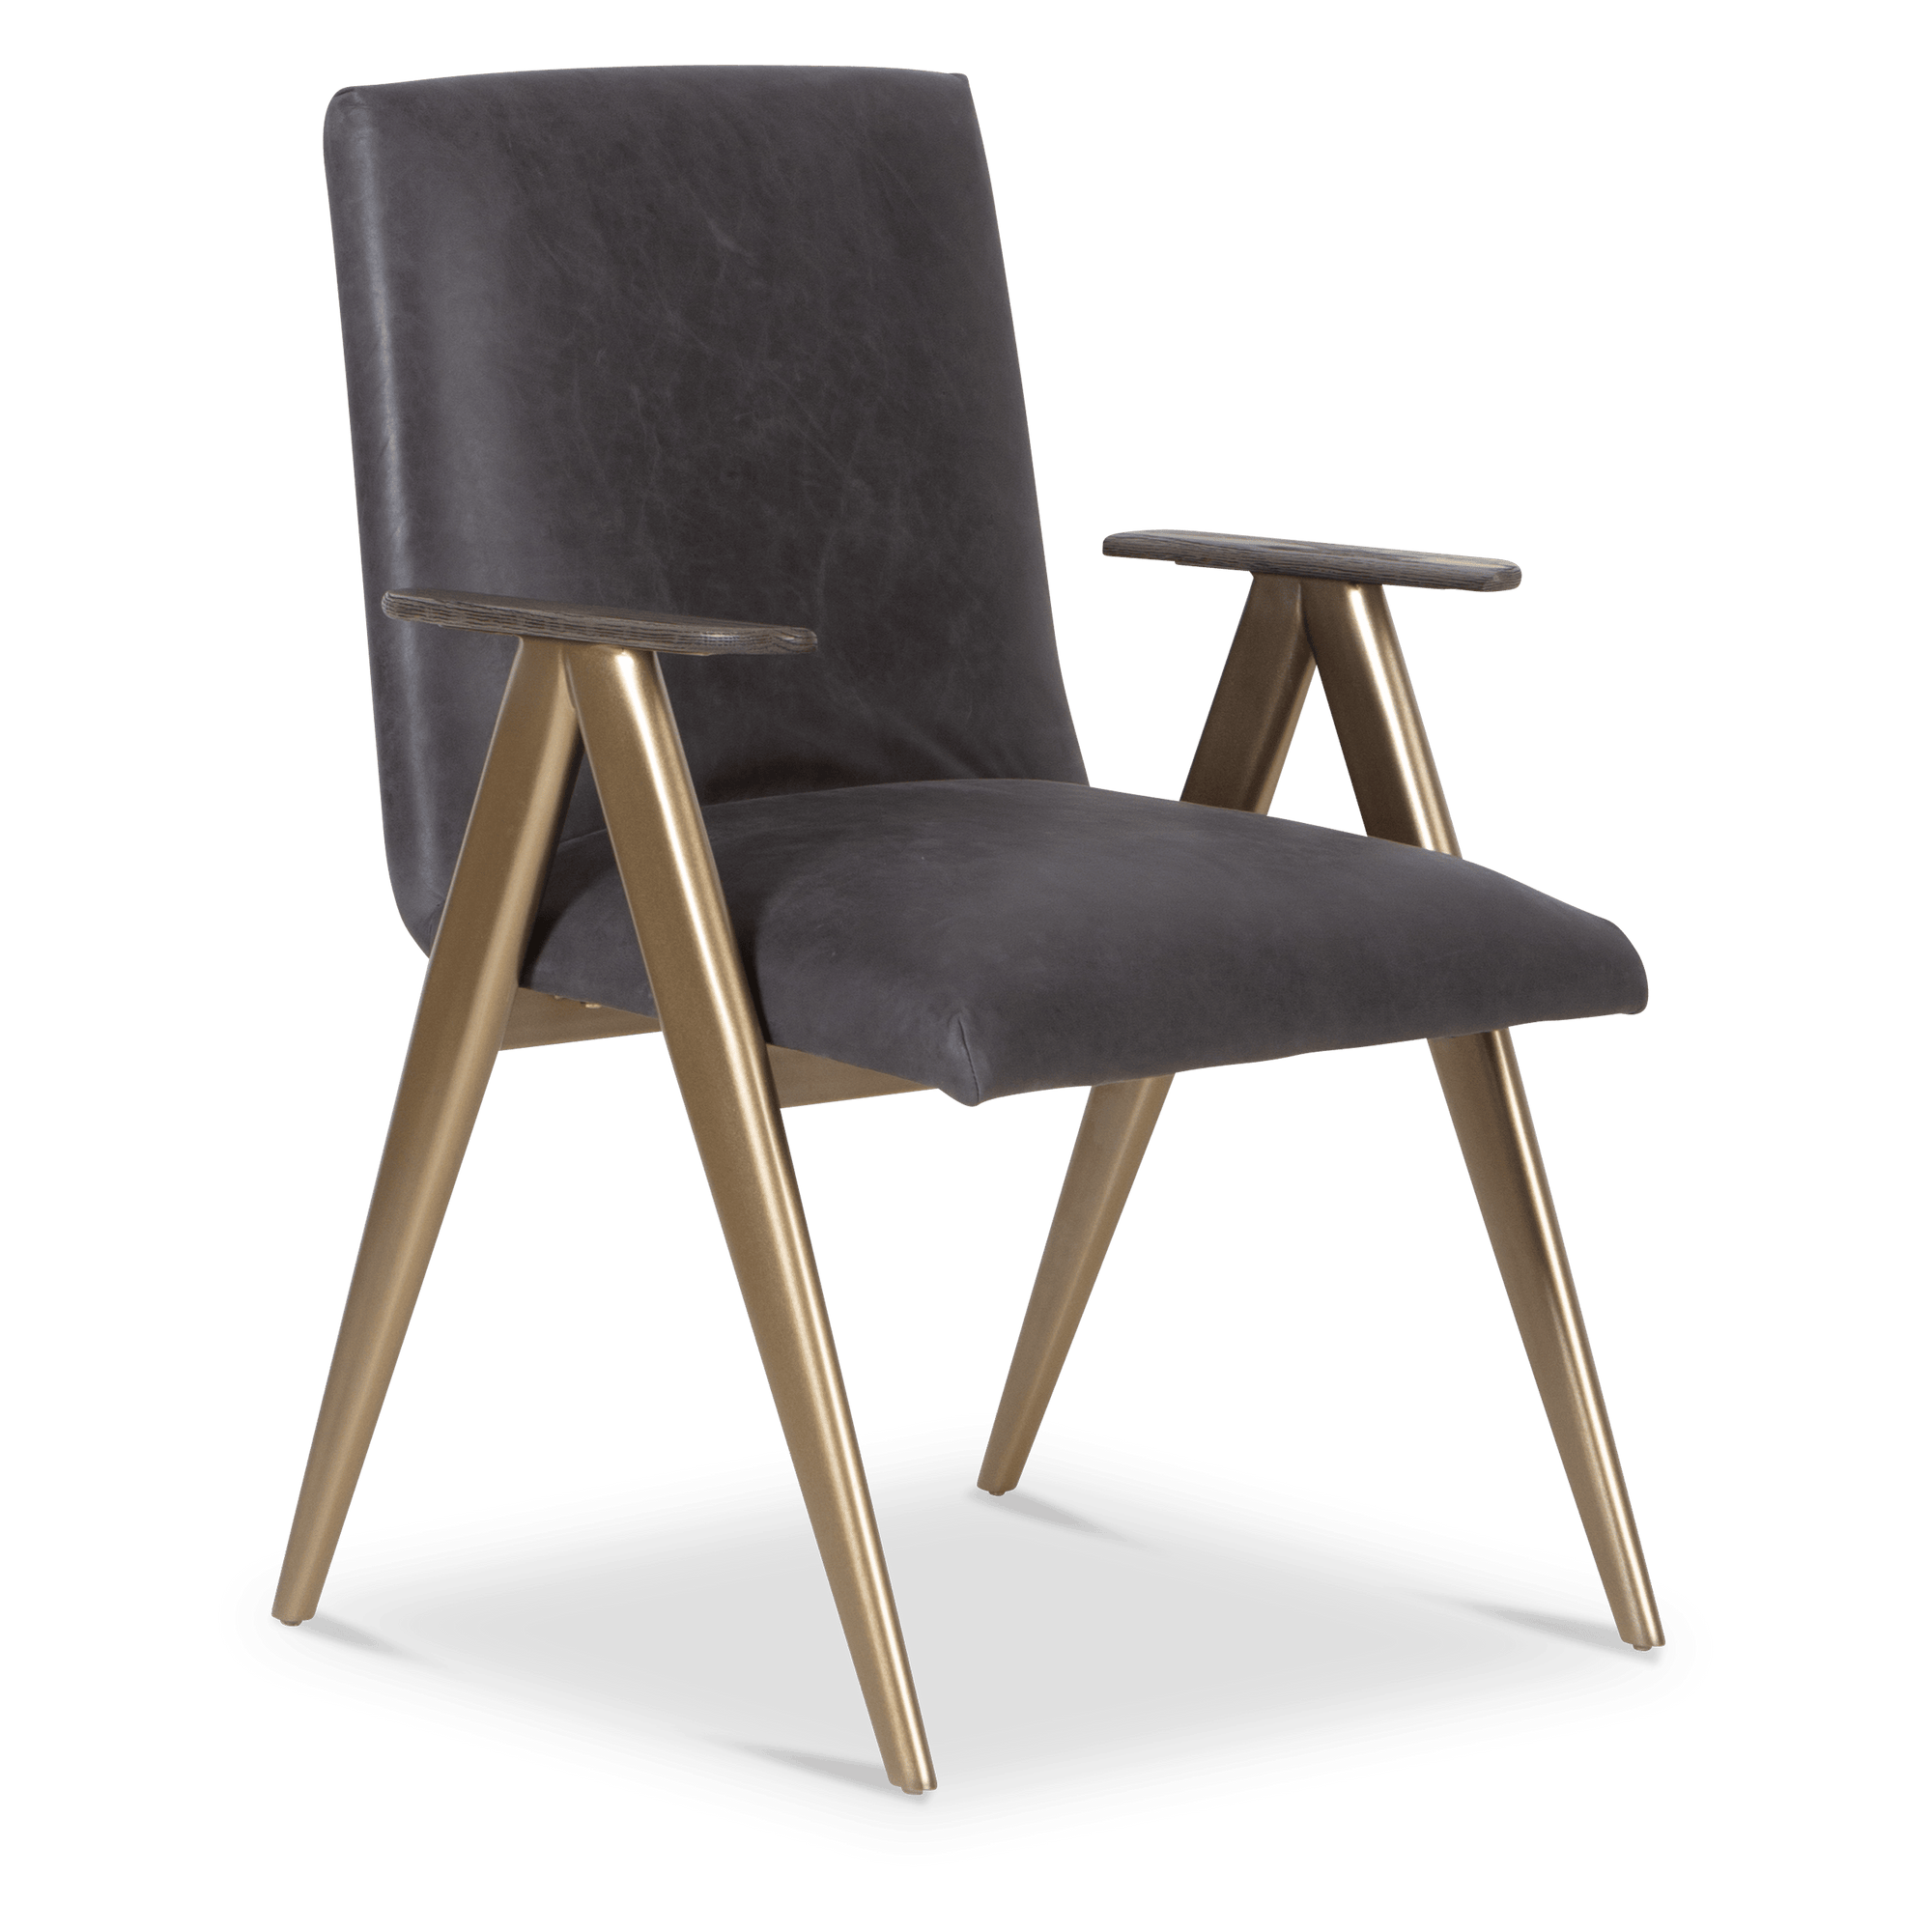 The Sanford Chair features inverted V-shaped legs in a brushed brass finish and a well-tailored seat wrapped in top-grain leather.